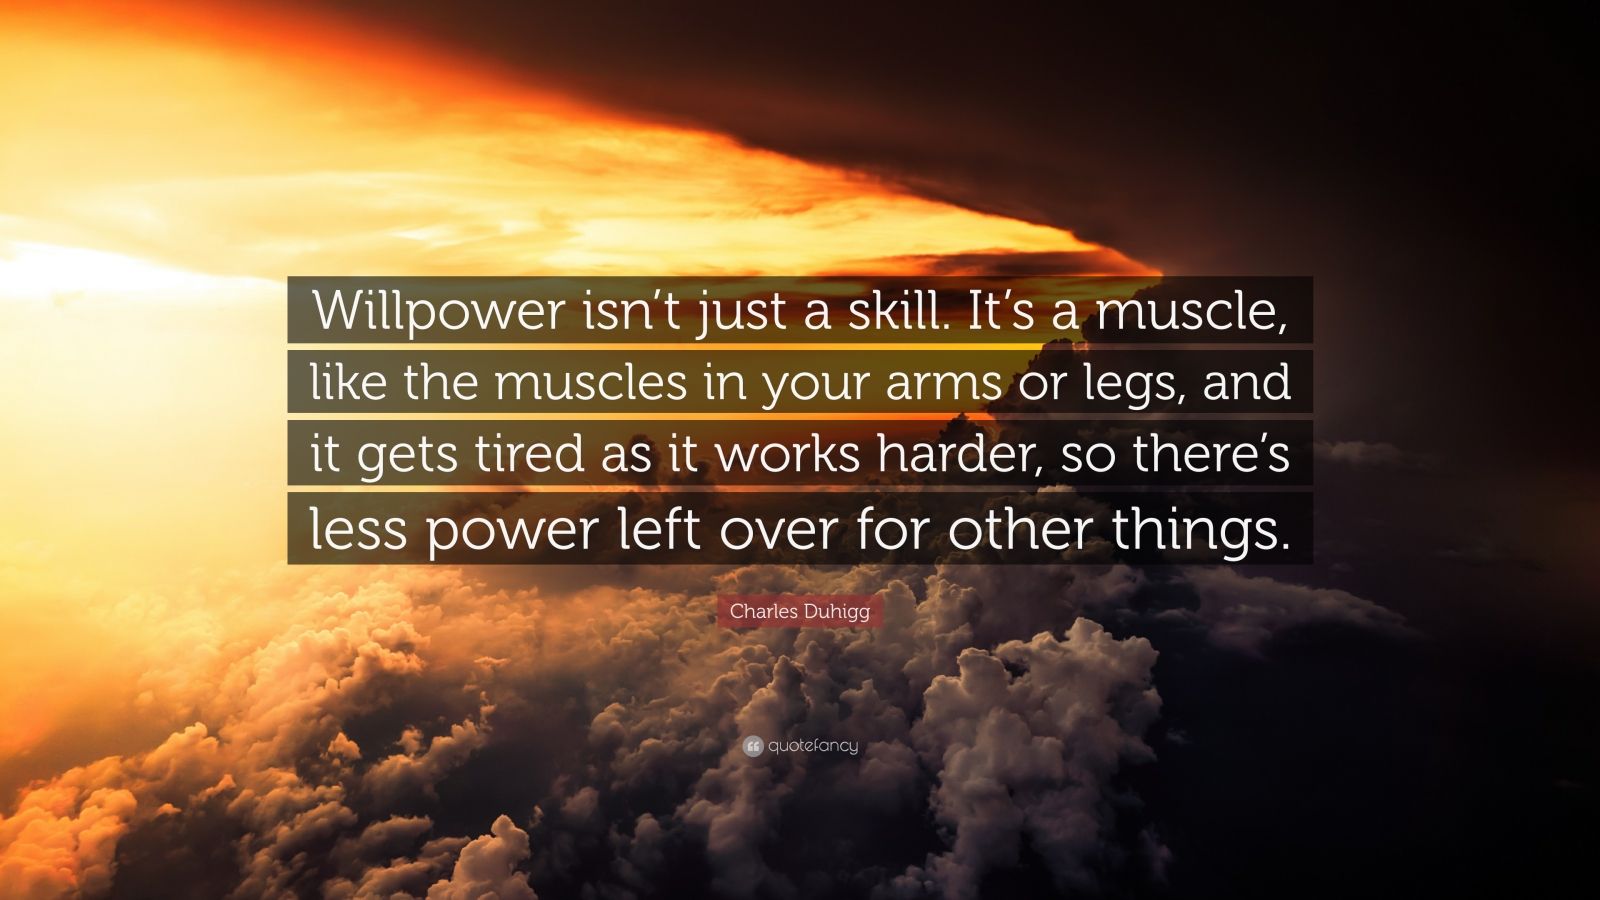 Charles Duhigg Quote: “Willpower isn’t just a skill. It’s a muscle